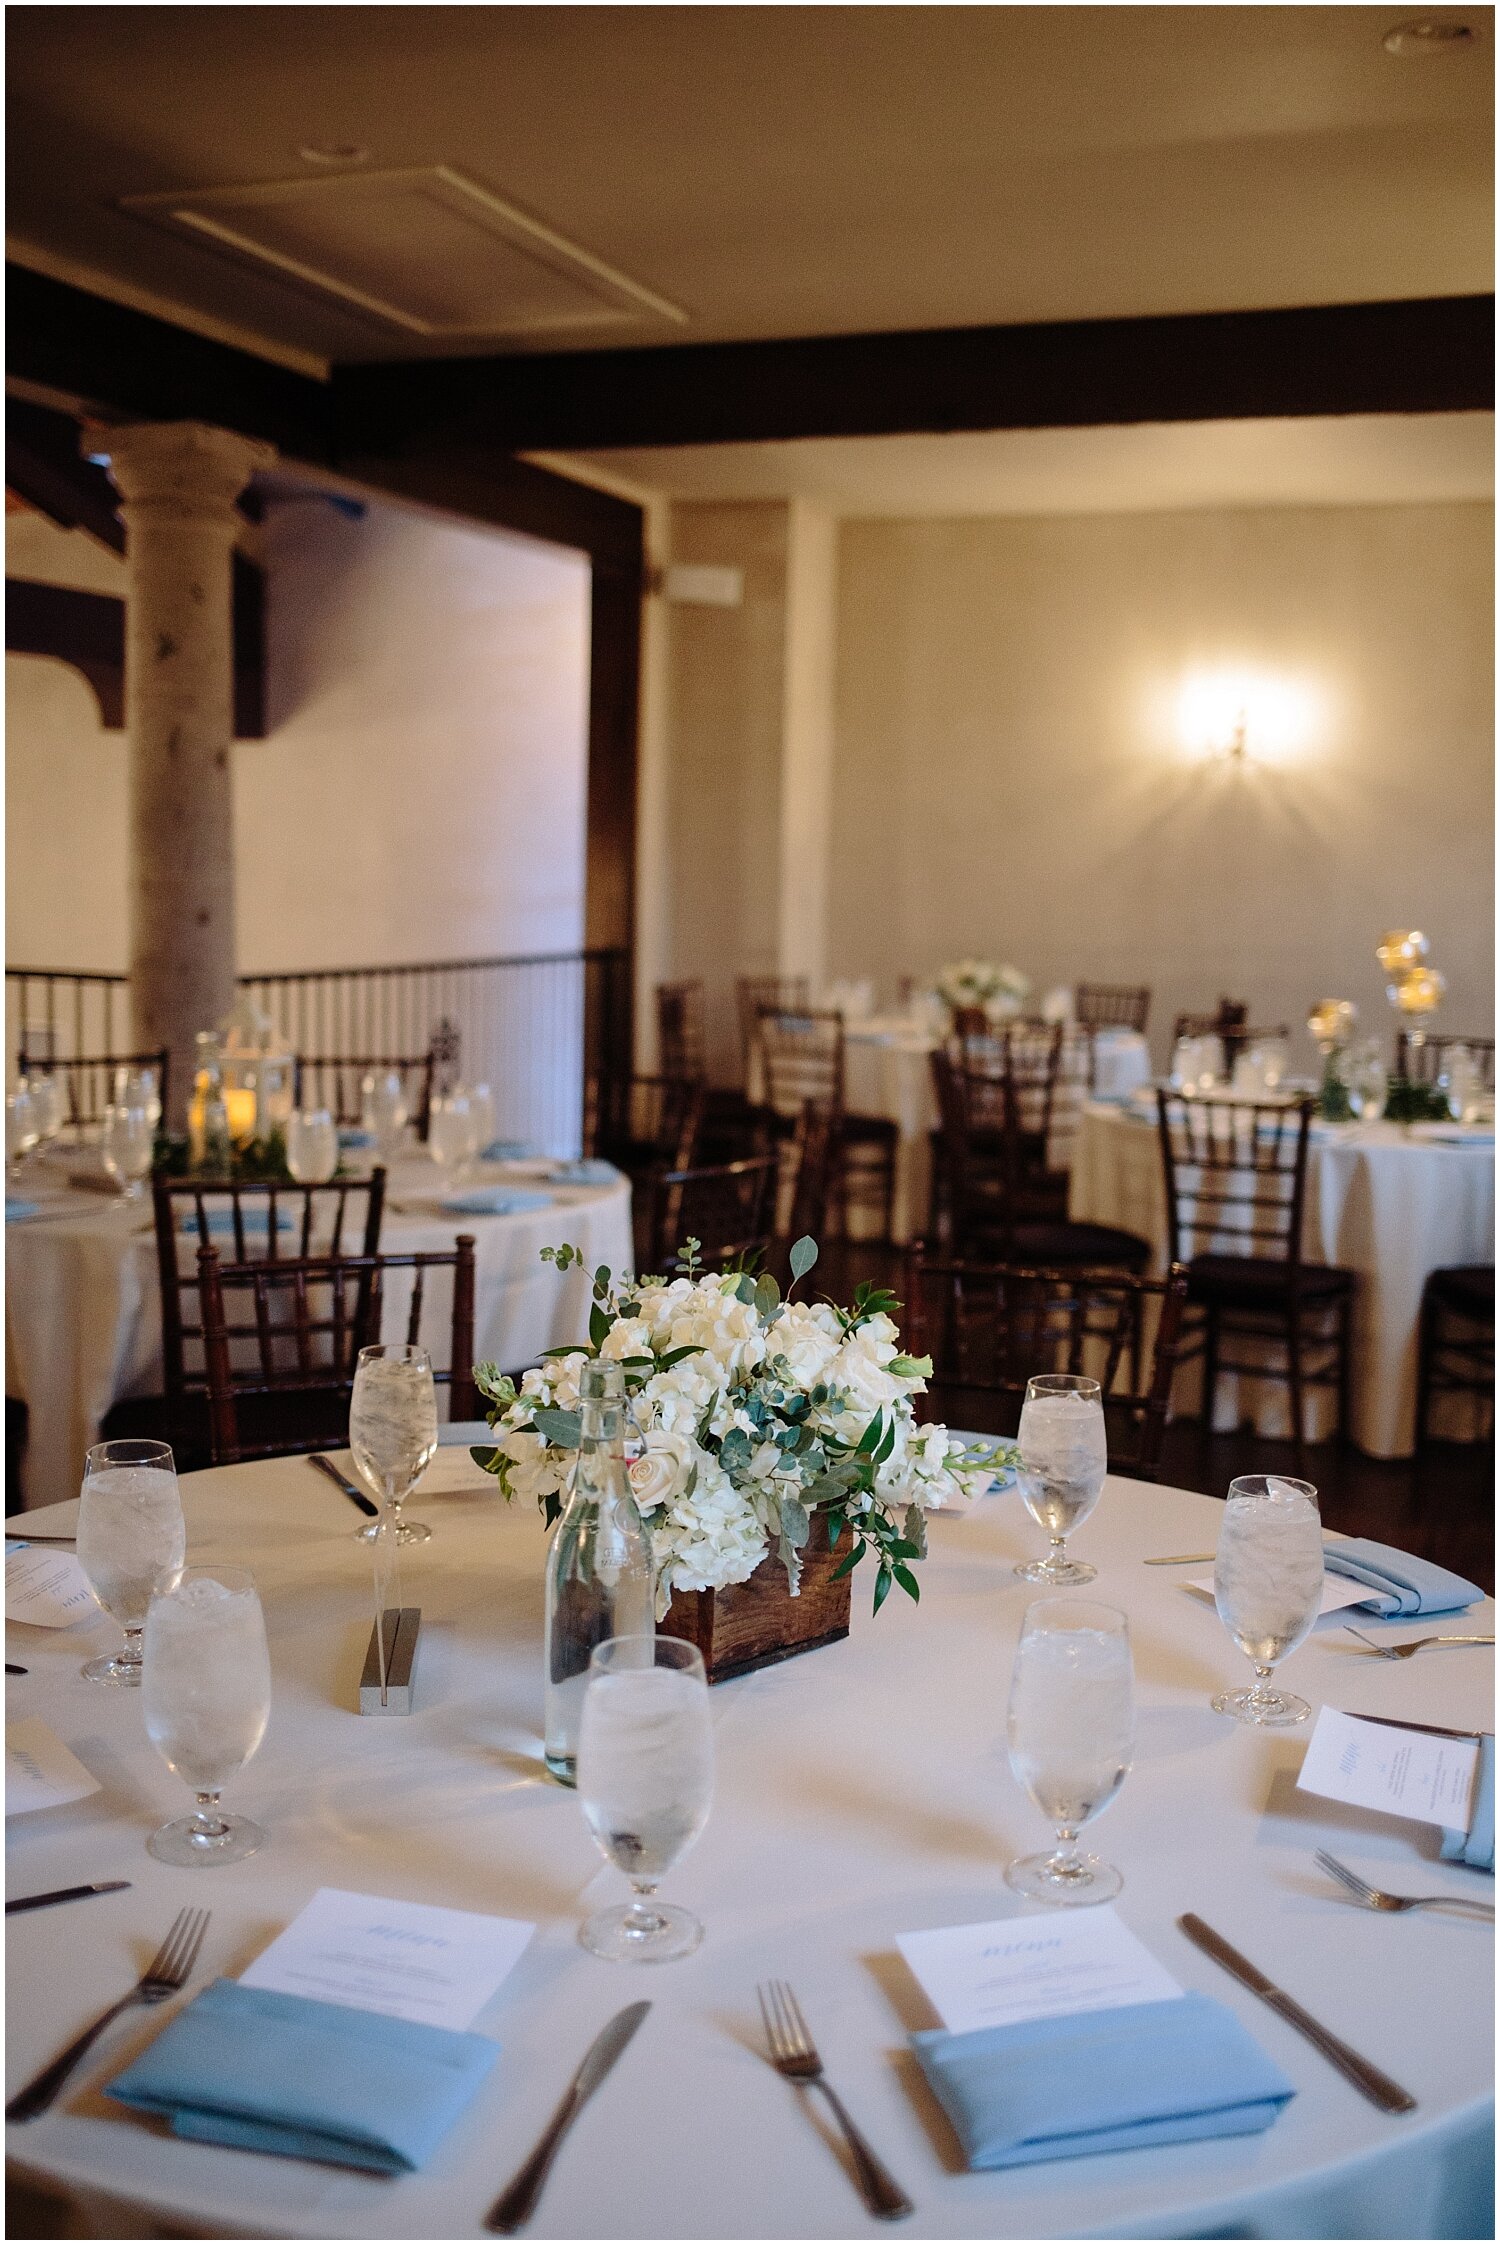  wedding table set and wedding centerpieces 